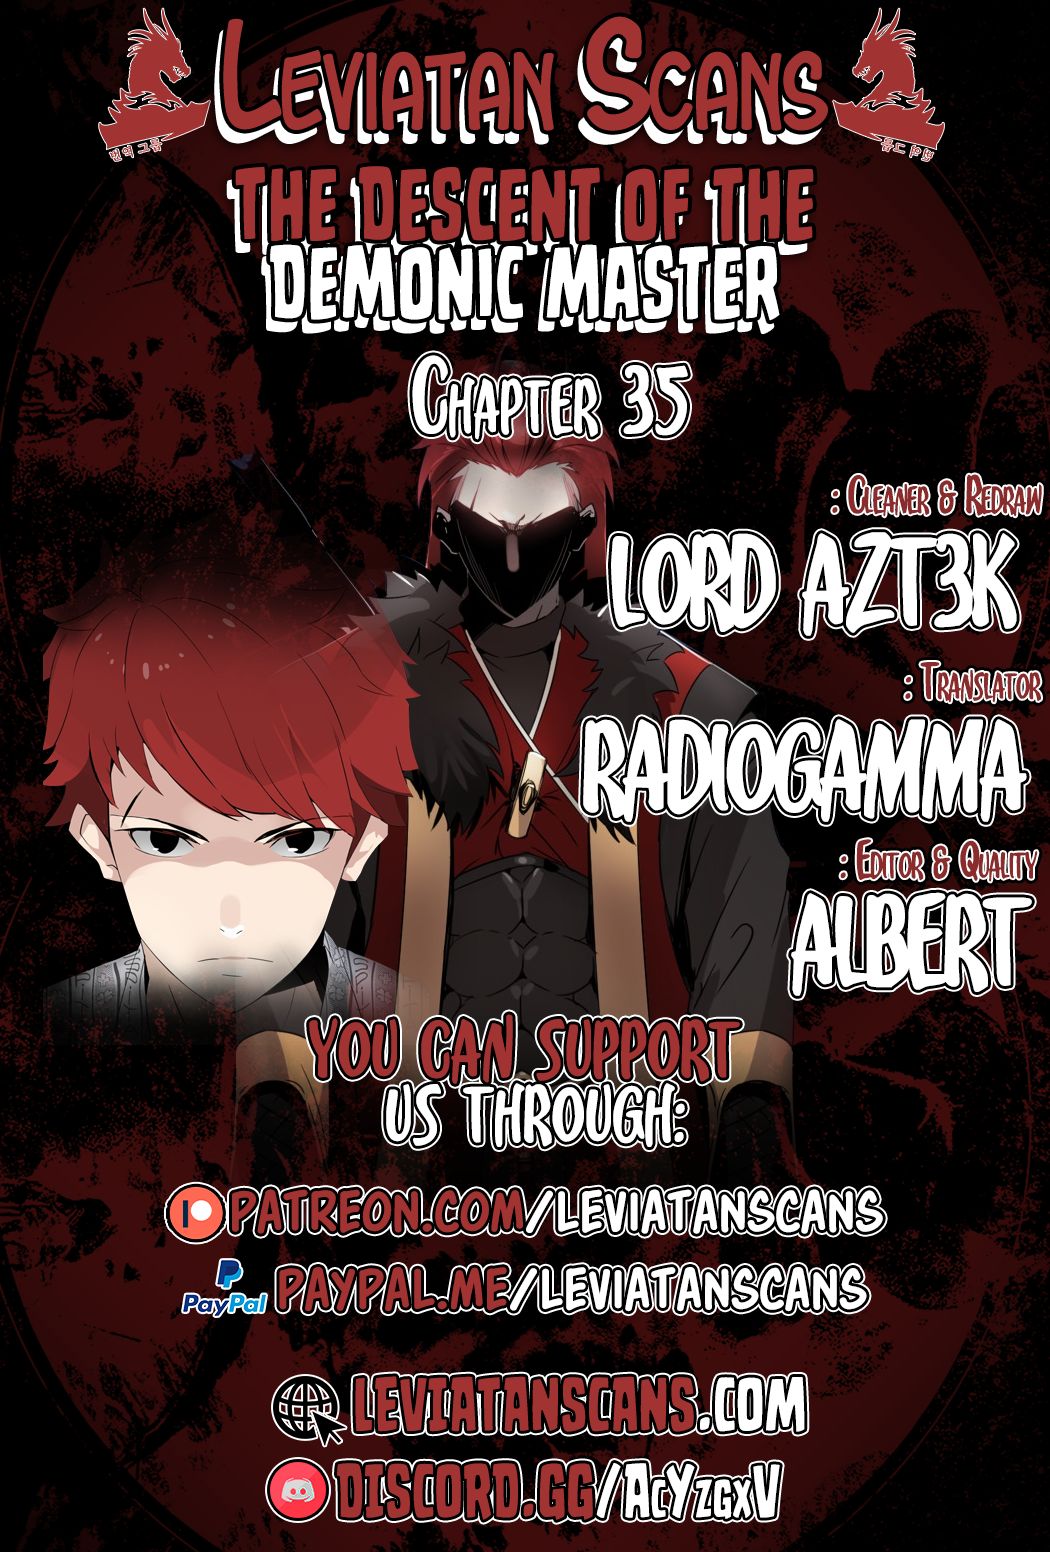 The Descent Of The Demonic Master Chapter 35